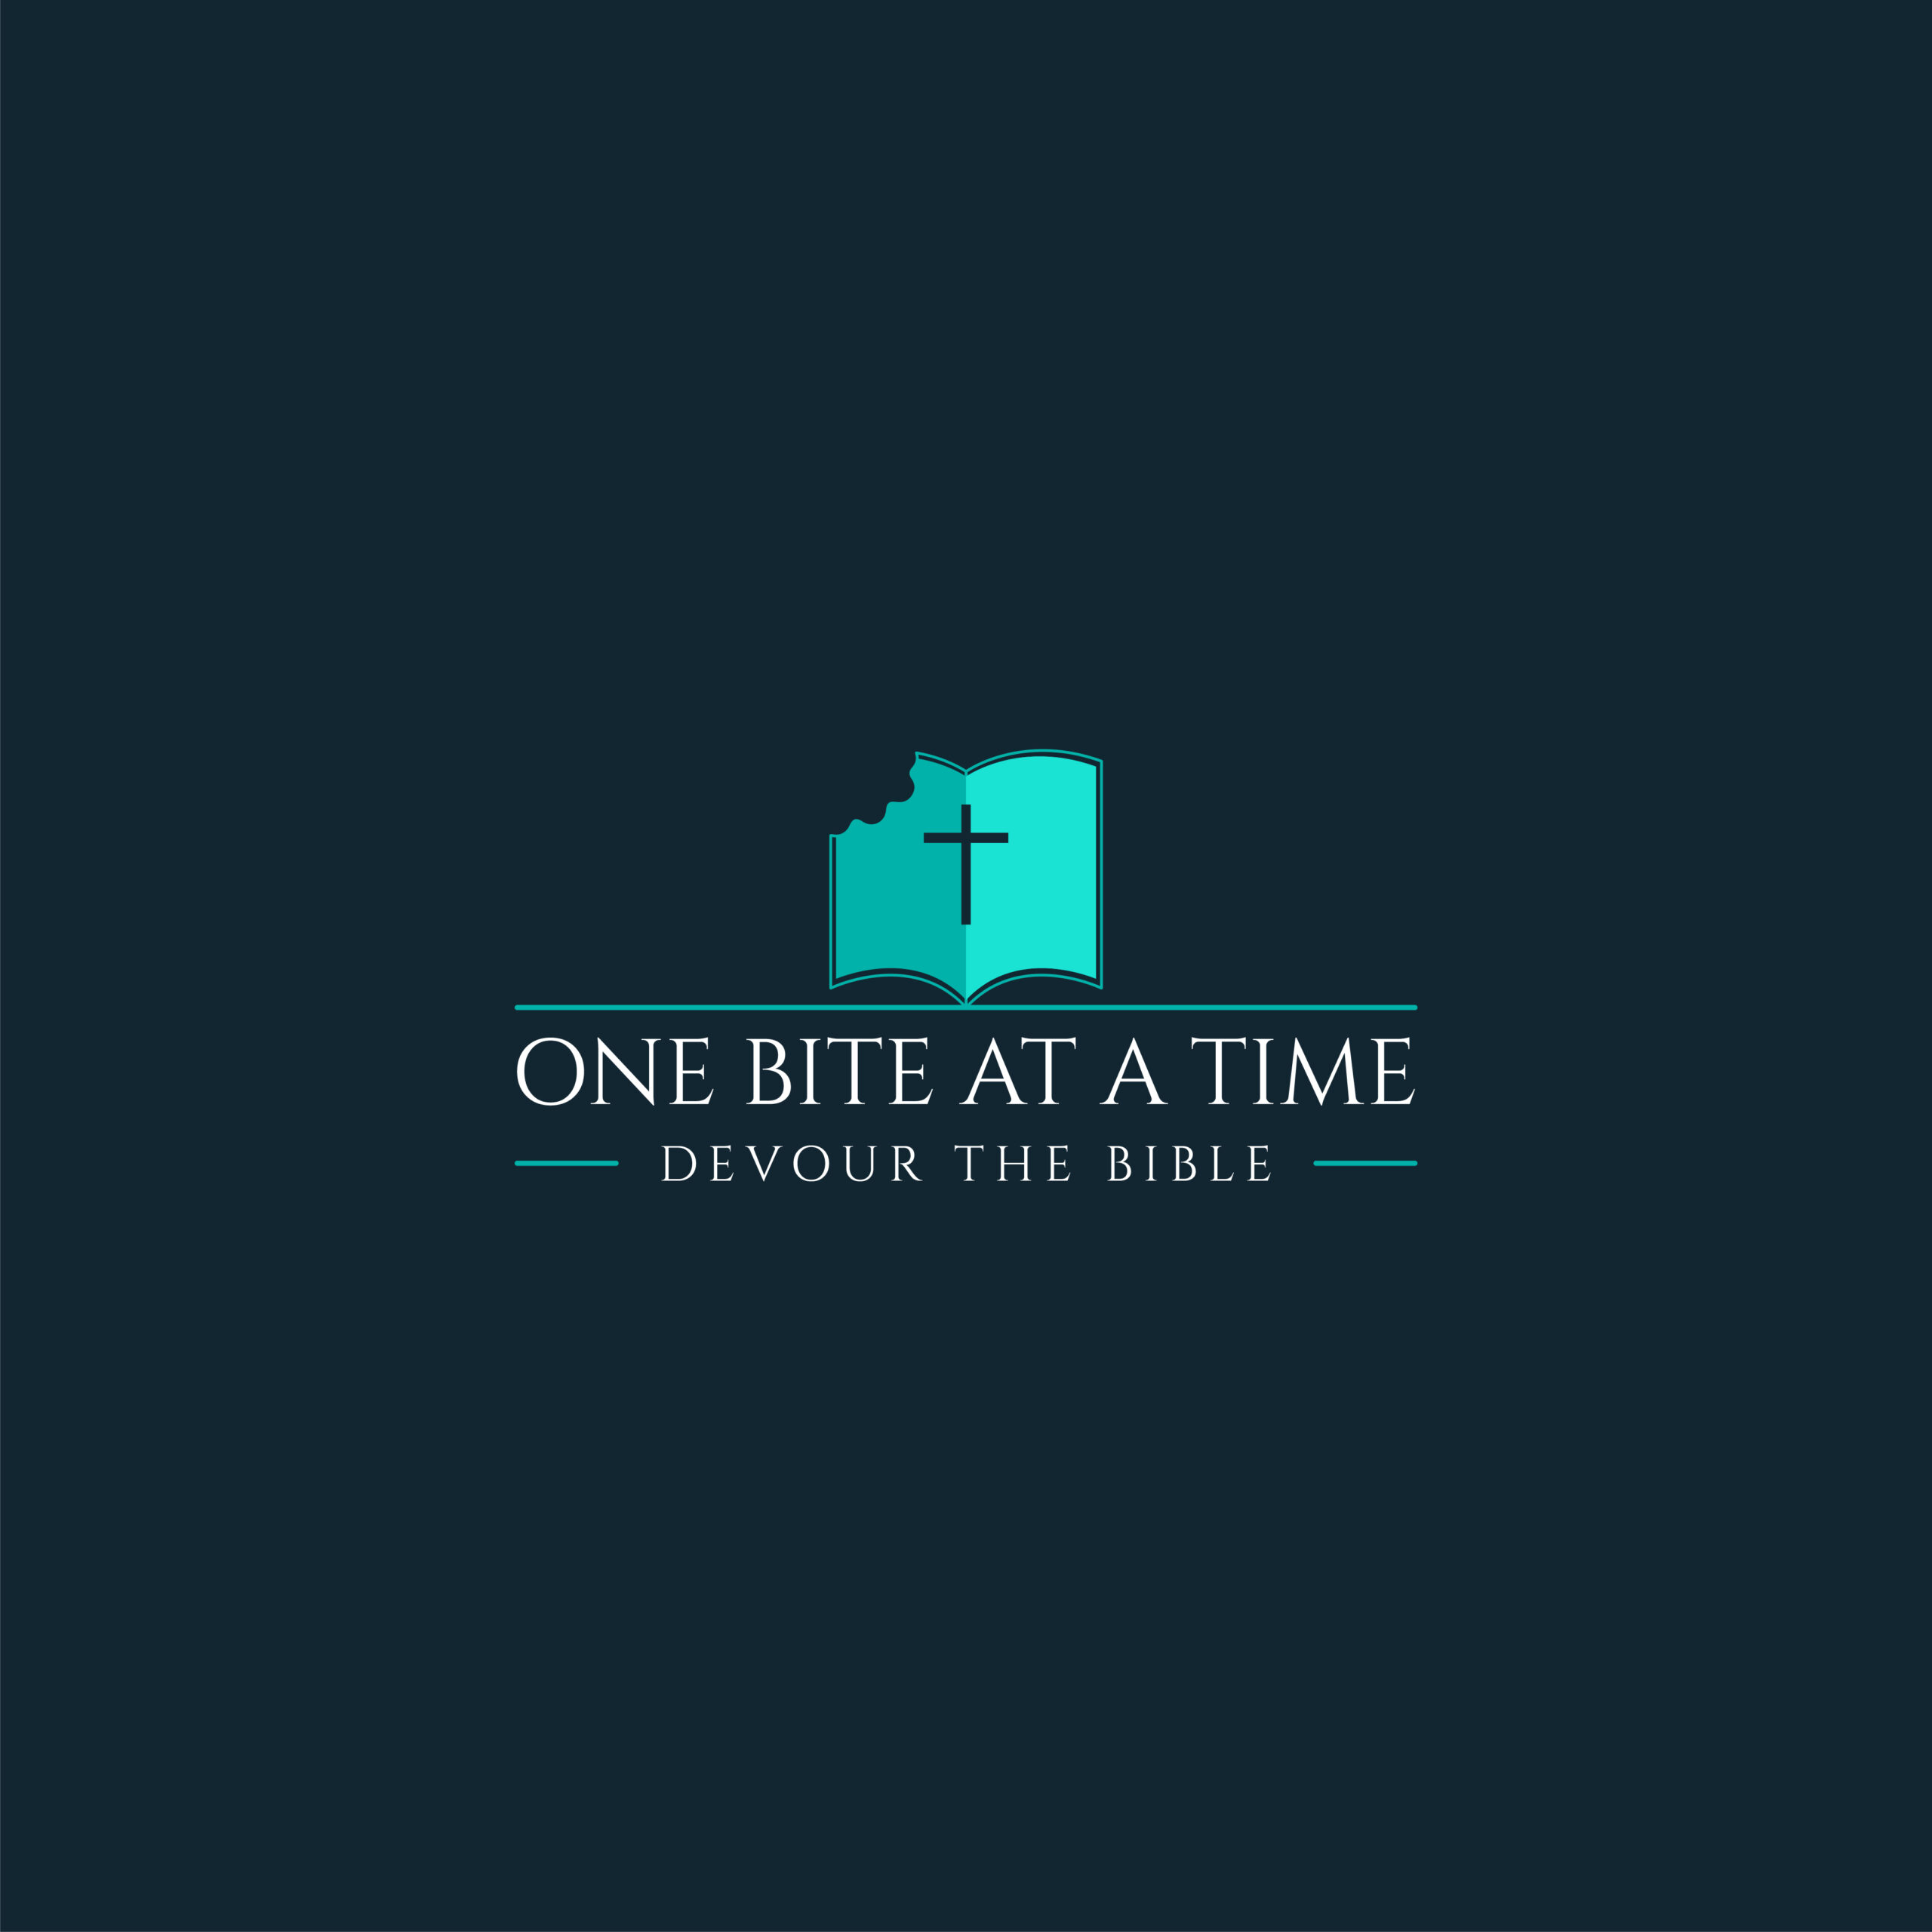 Devour the bible: One Bite at a time